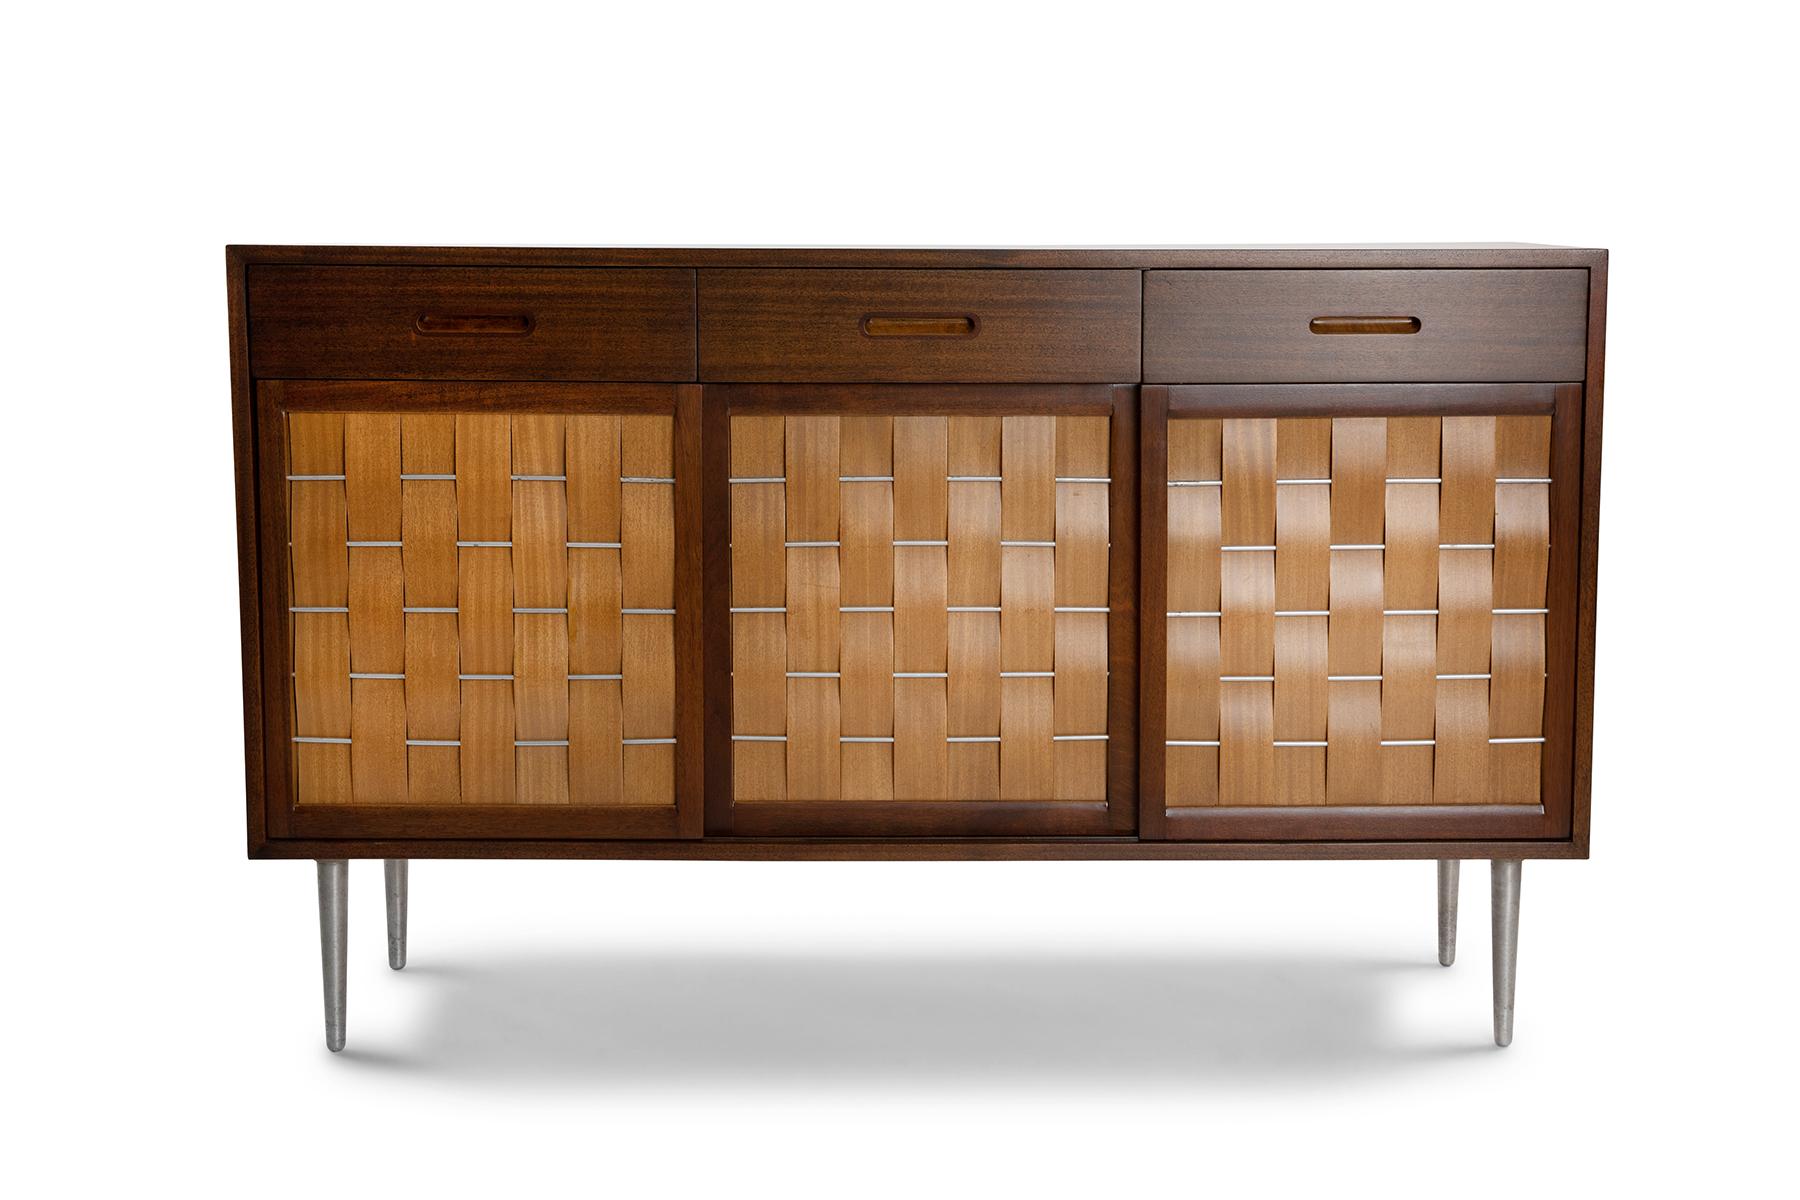 Edward Wormley for Dunbar woven front sideboard, circa mid 1950's. This example has a striped African mahogany case, stainless steel legs and lots of interior storage. It has been newly and impeccably refinished.